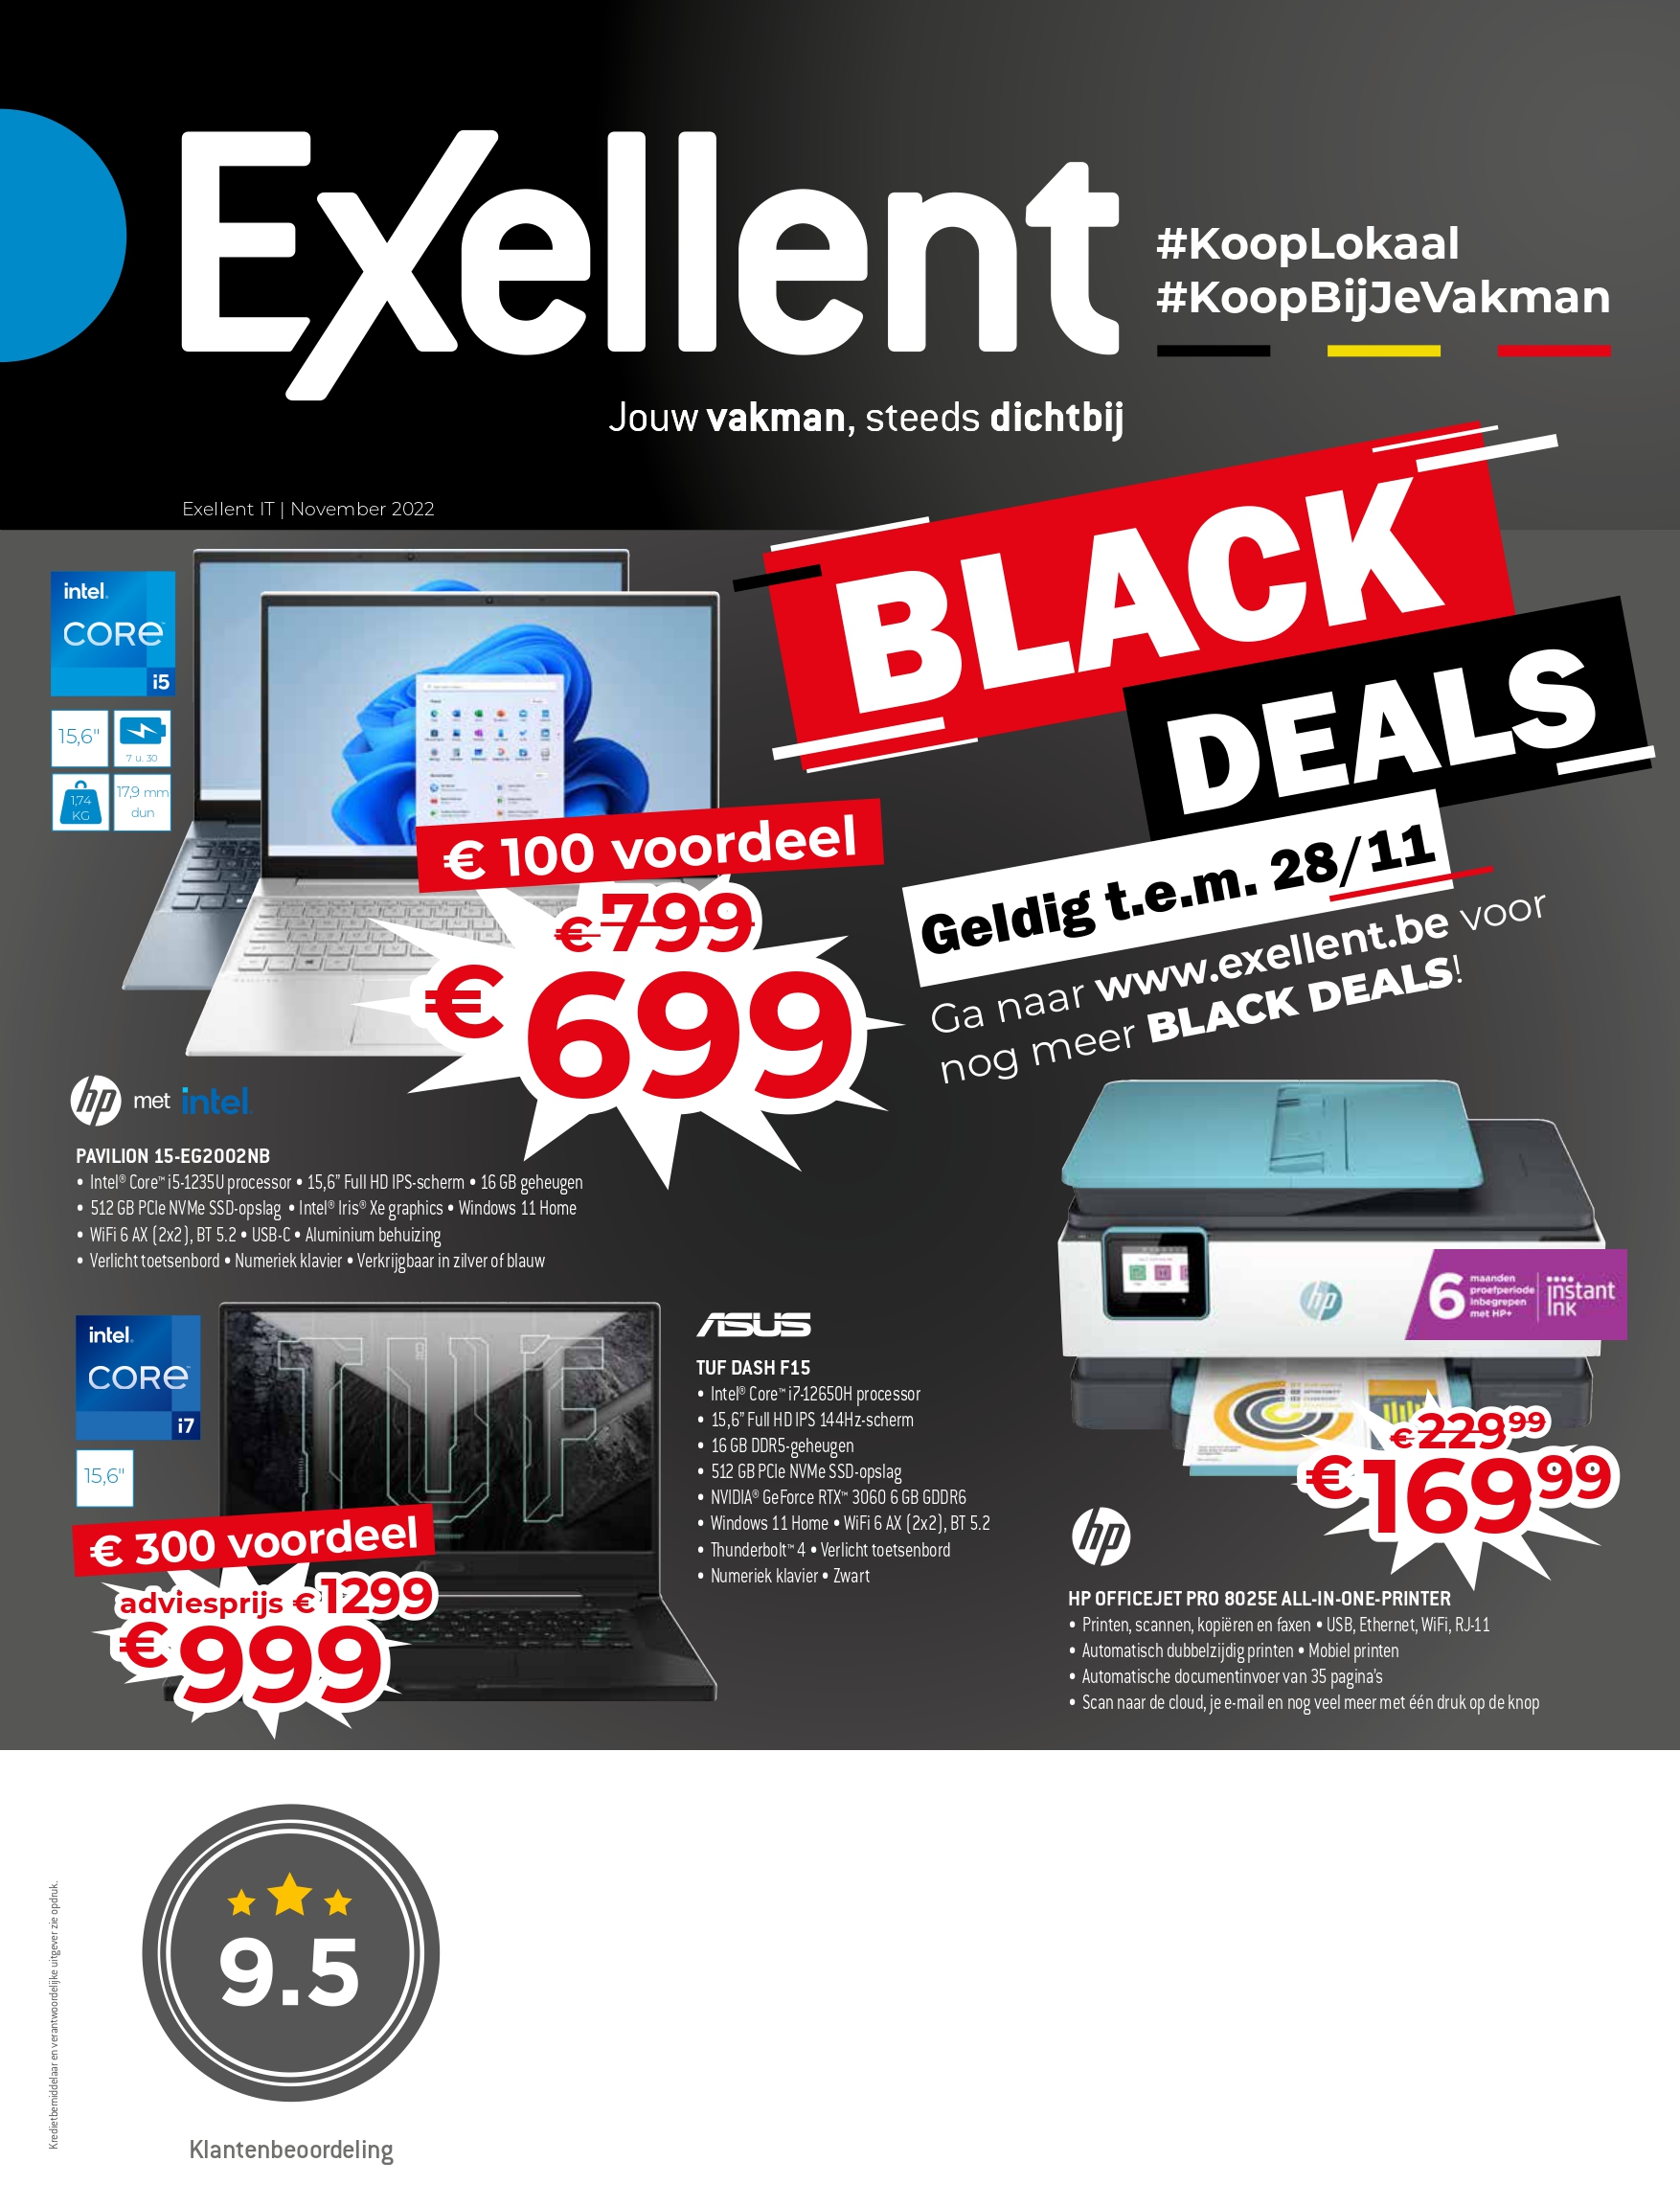 Black friday 2022 deals marcelis halle folder Clevertouch CTOUCH Prowise